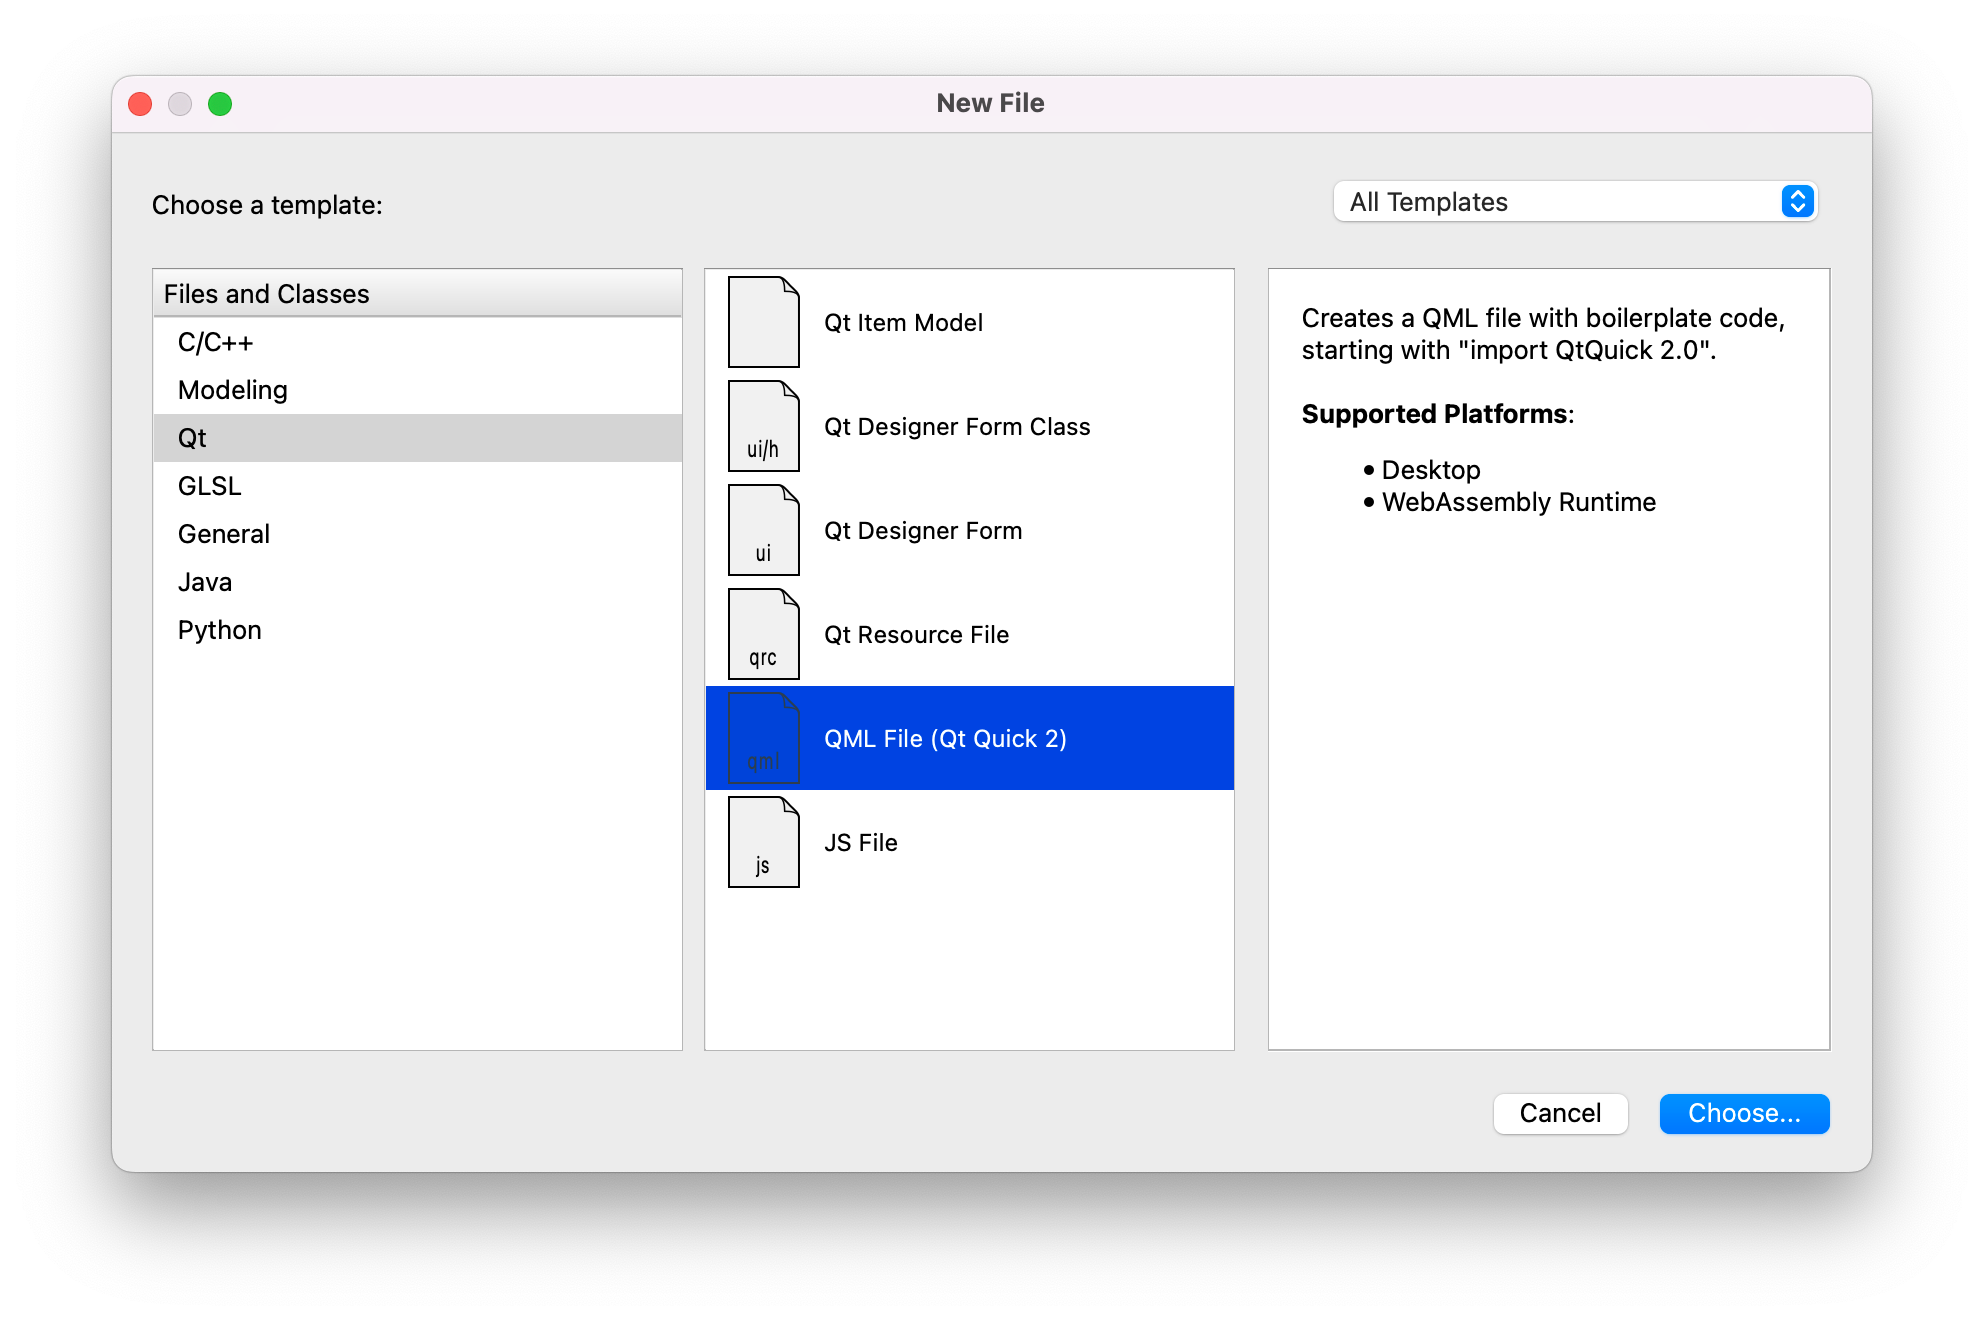 Screen shot of the Qt Creator New File Dialog with Qt selected in "Files and Classes" and QML File (Qt Quick 2) highlighted